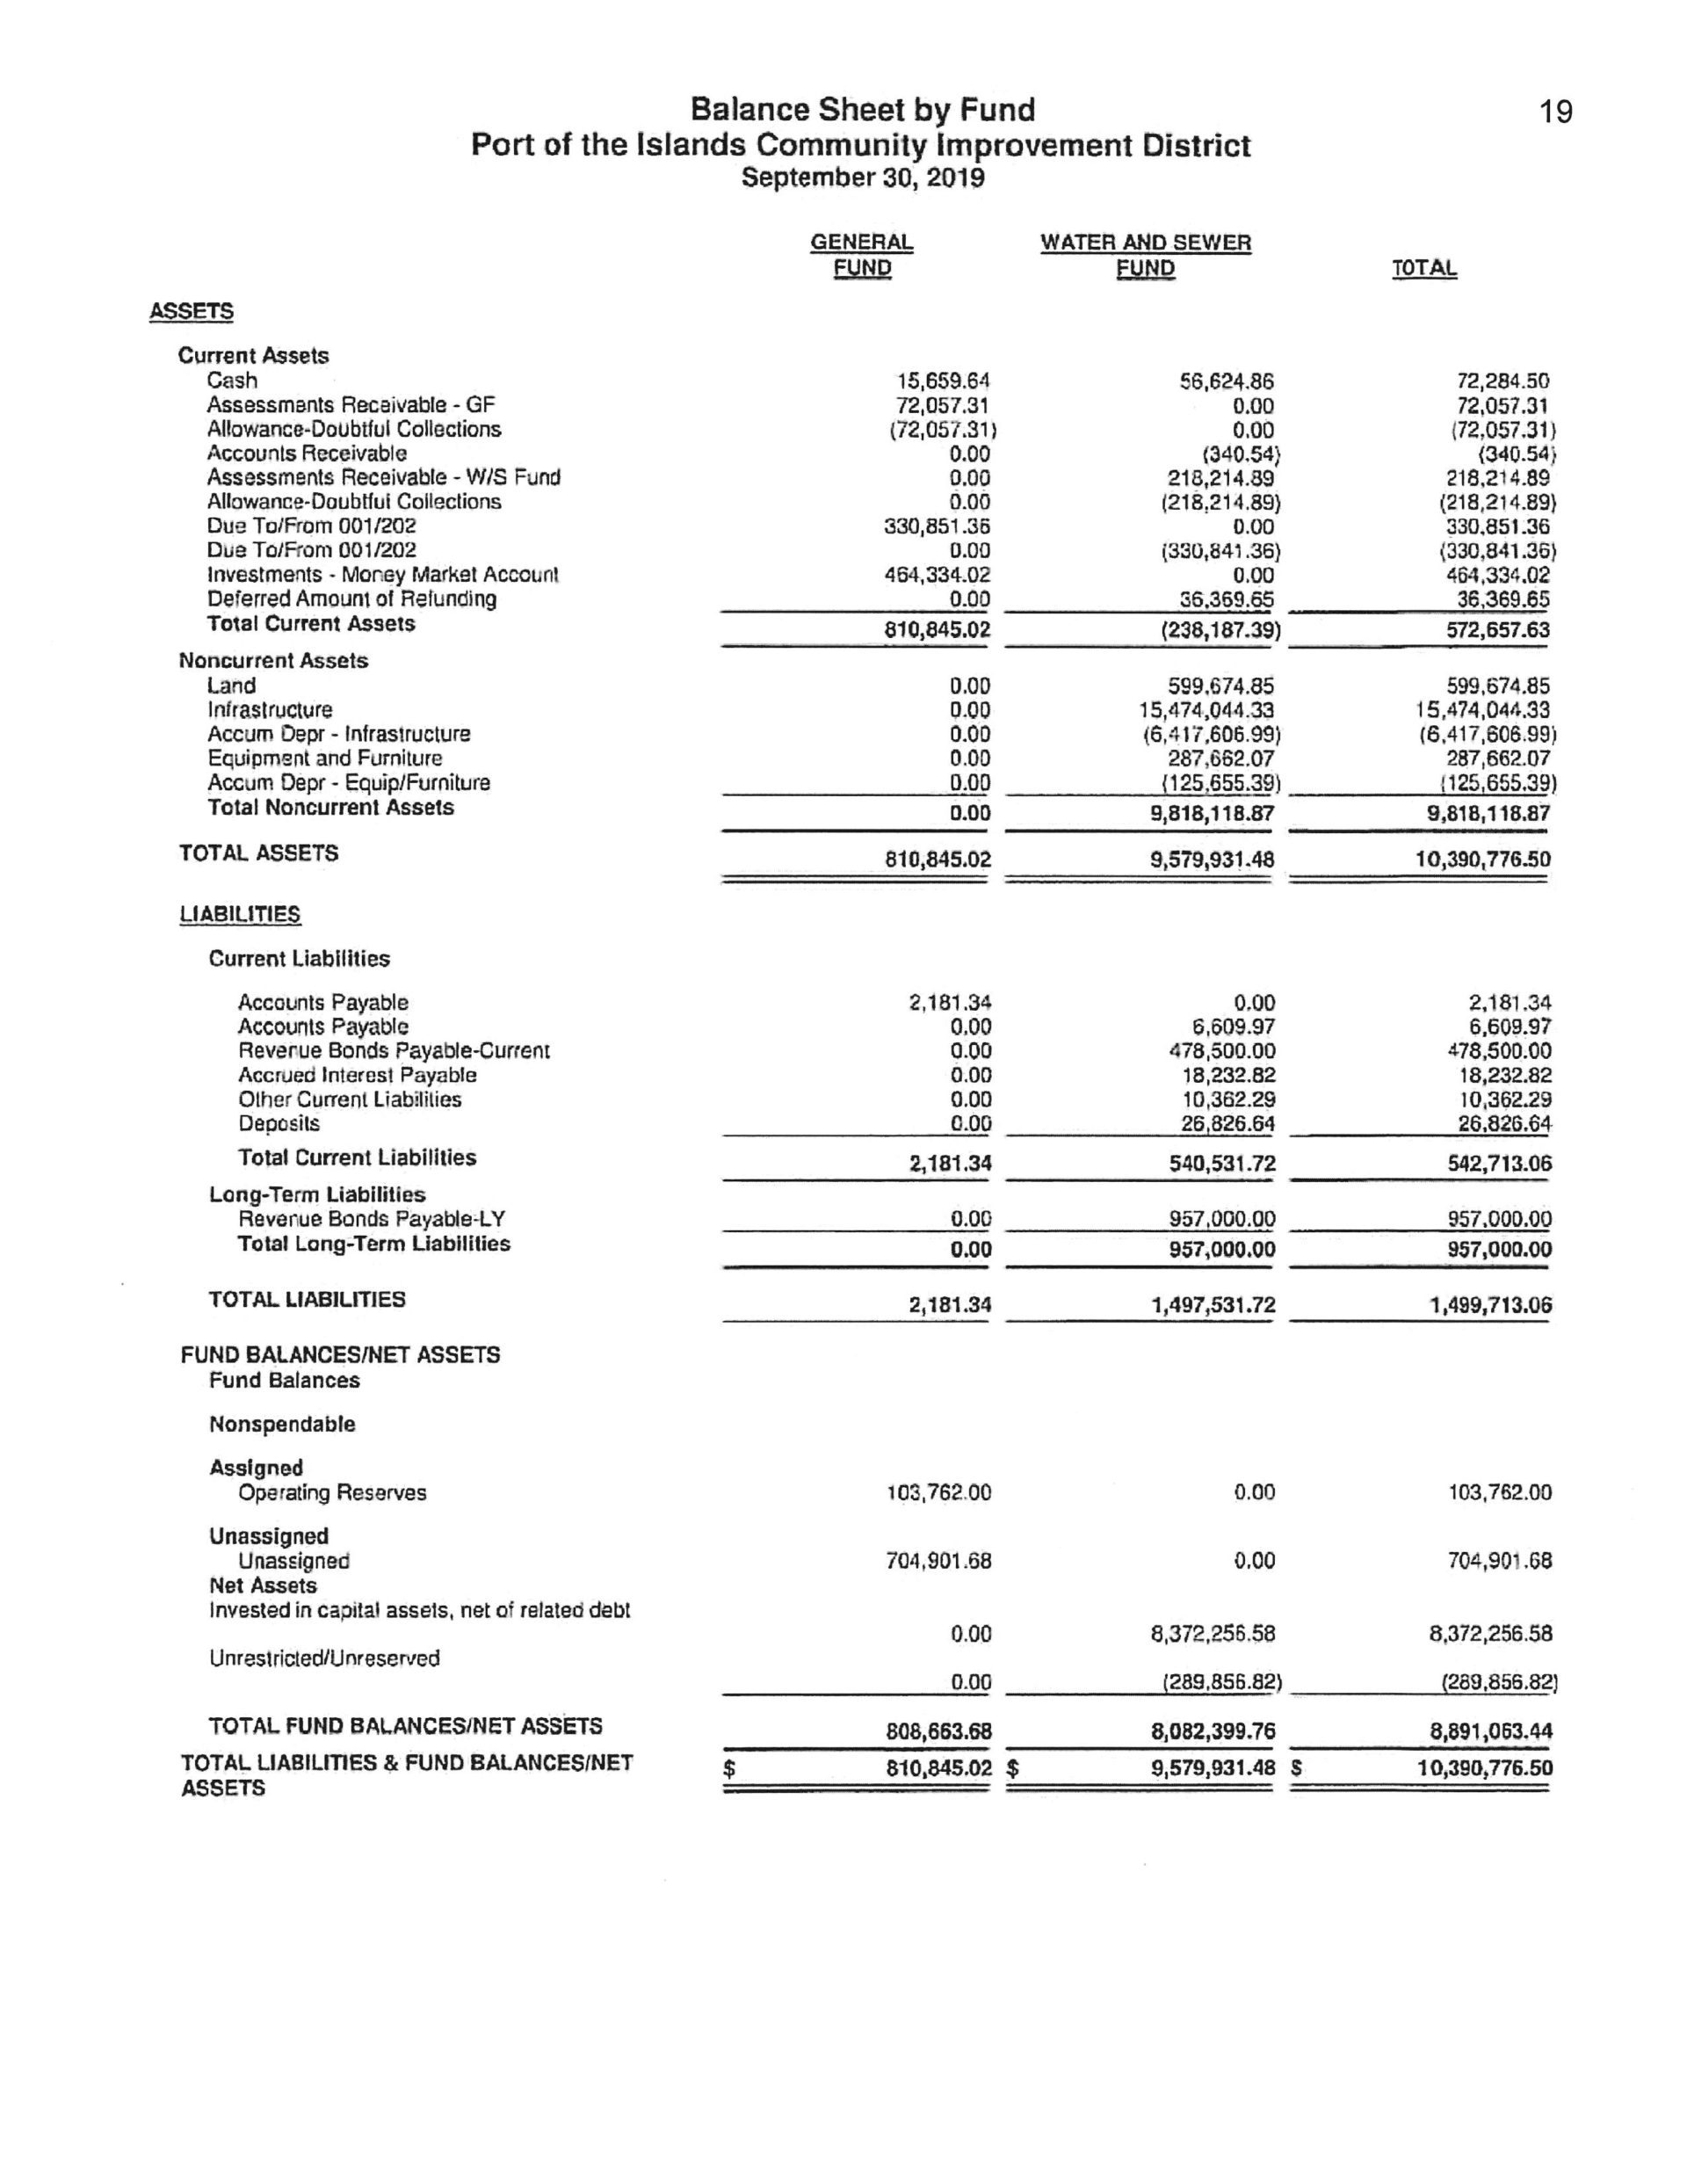 Balance Sheet by Fund Financial Report 9-2019 page 2